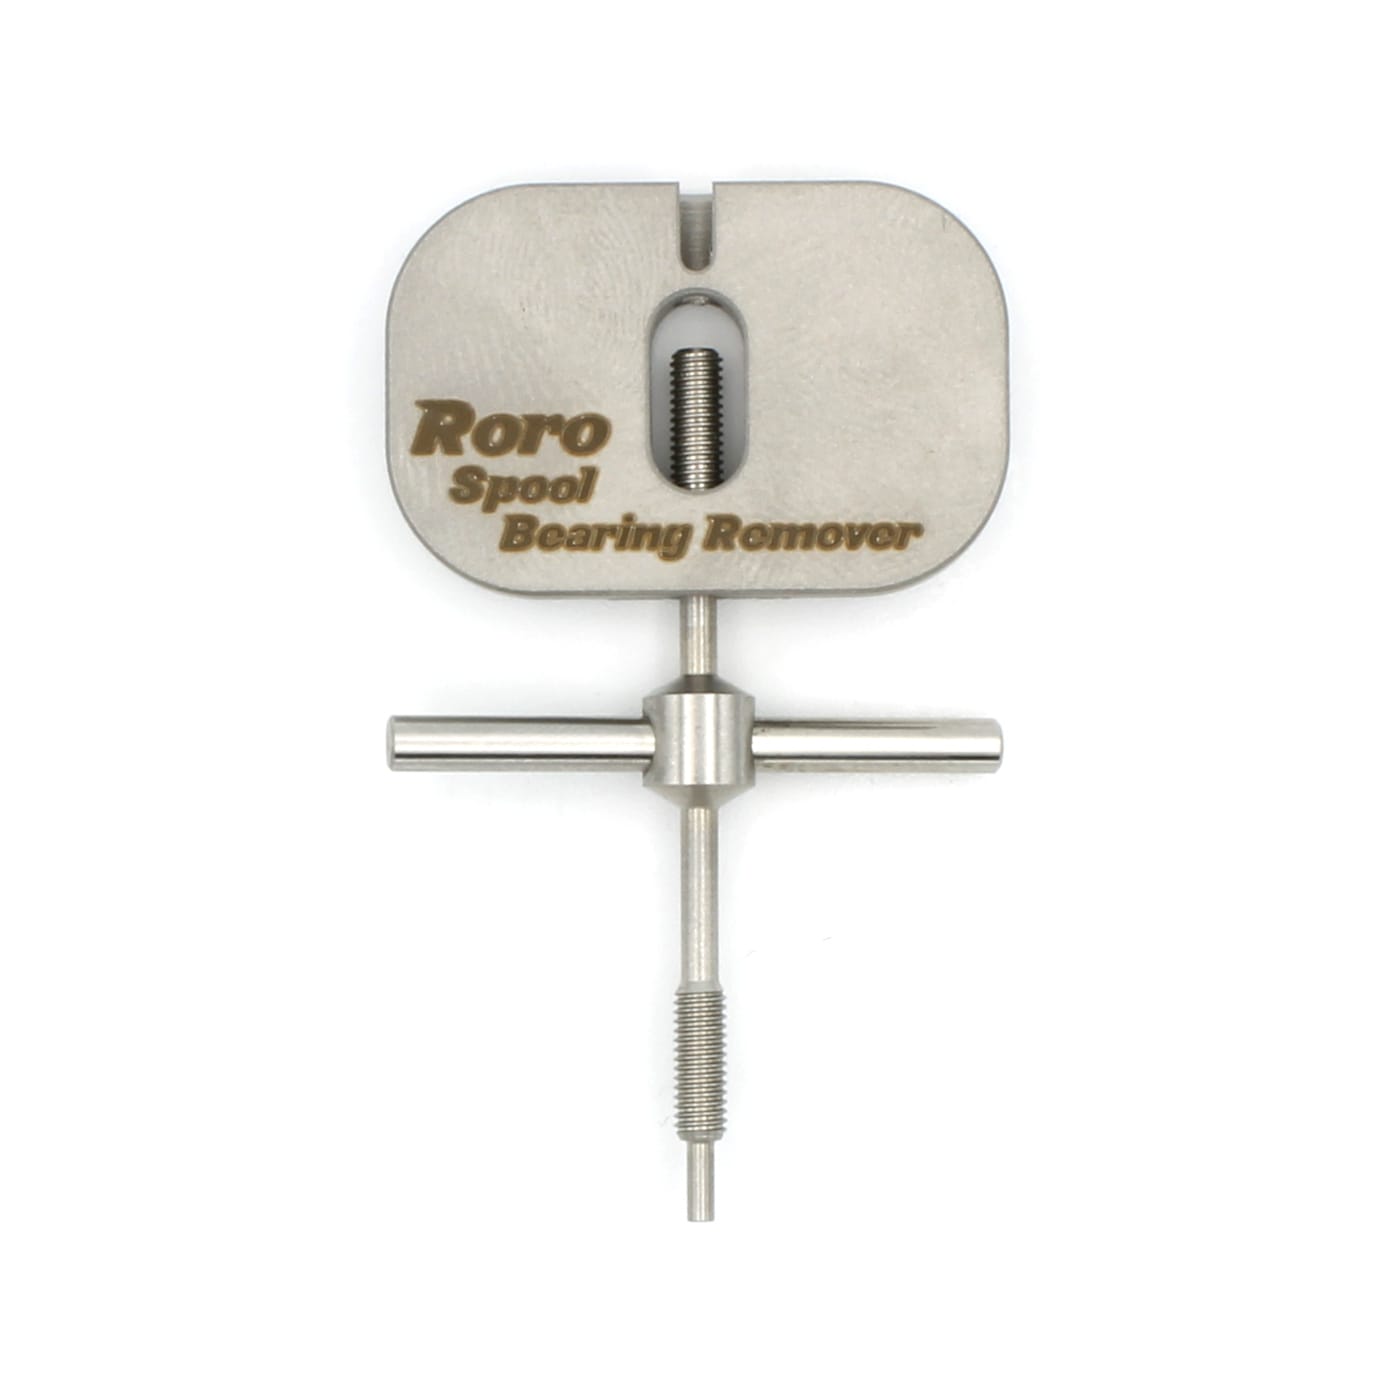 Roro Spool Bearing Pin Removal Tool TX8 - Bait Finesse Empire